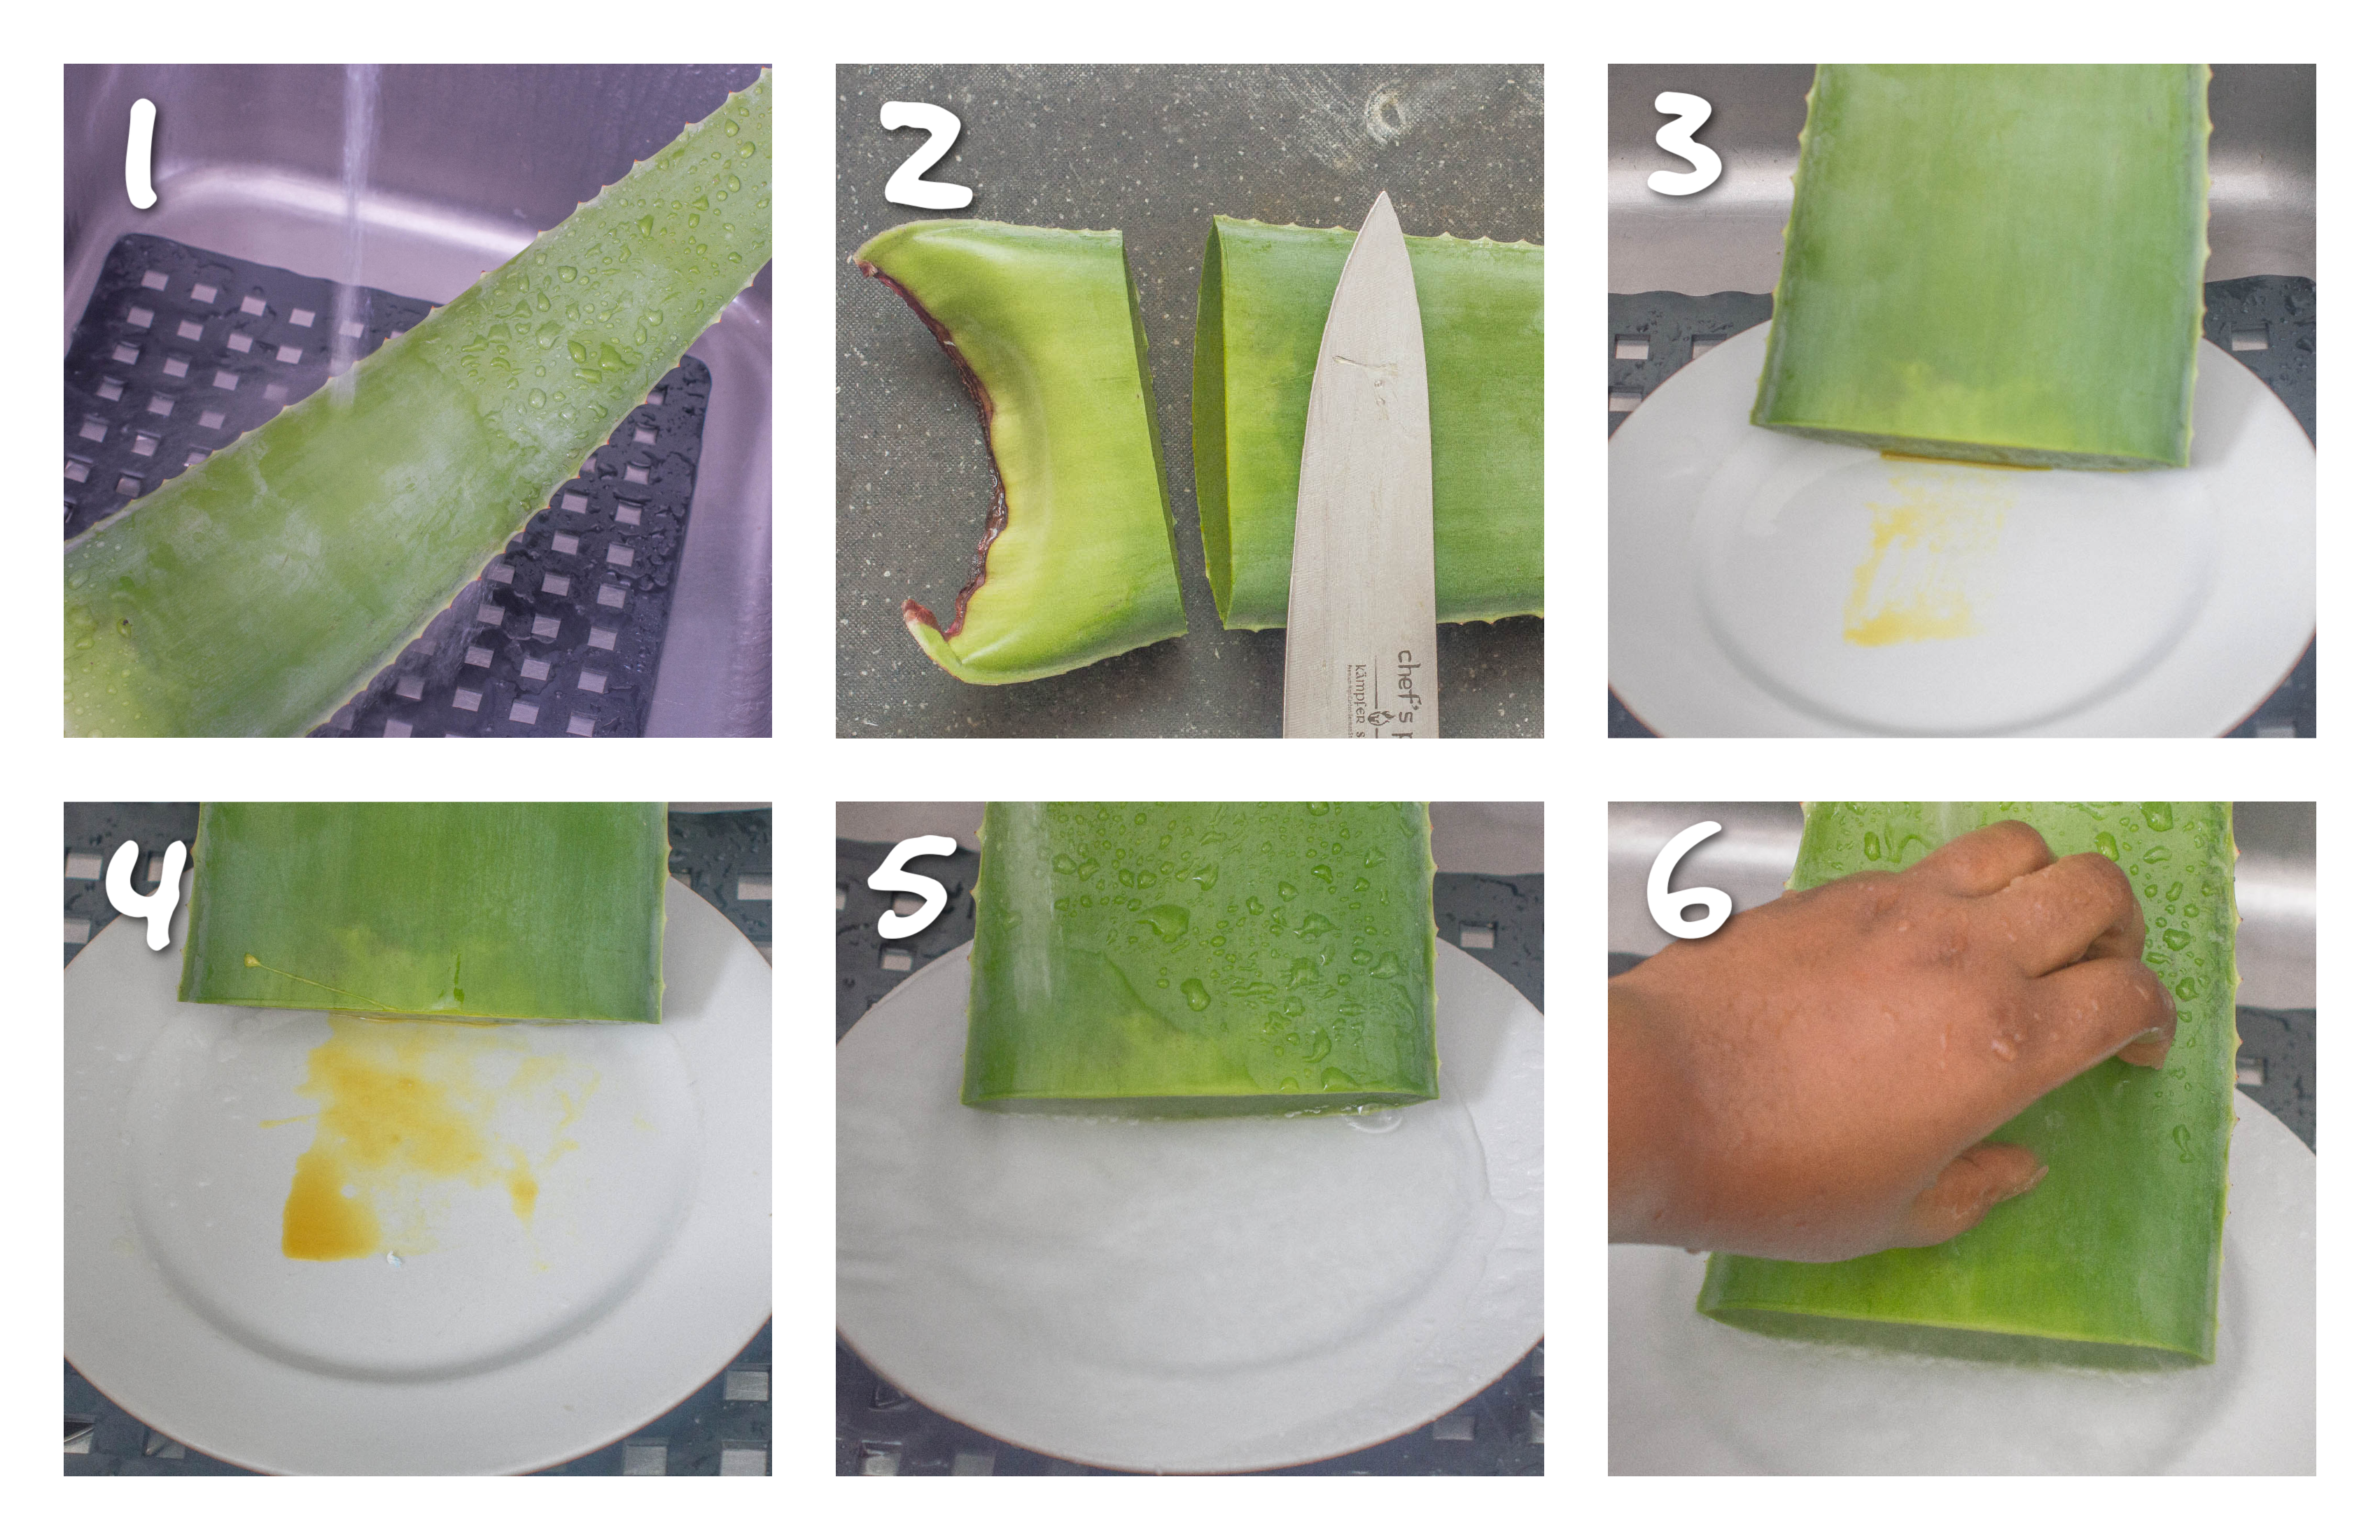 steps 1-6 removing the latex from the aloe vera